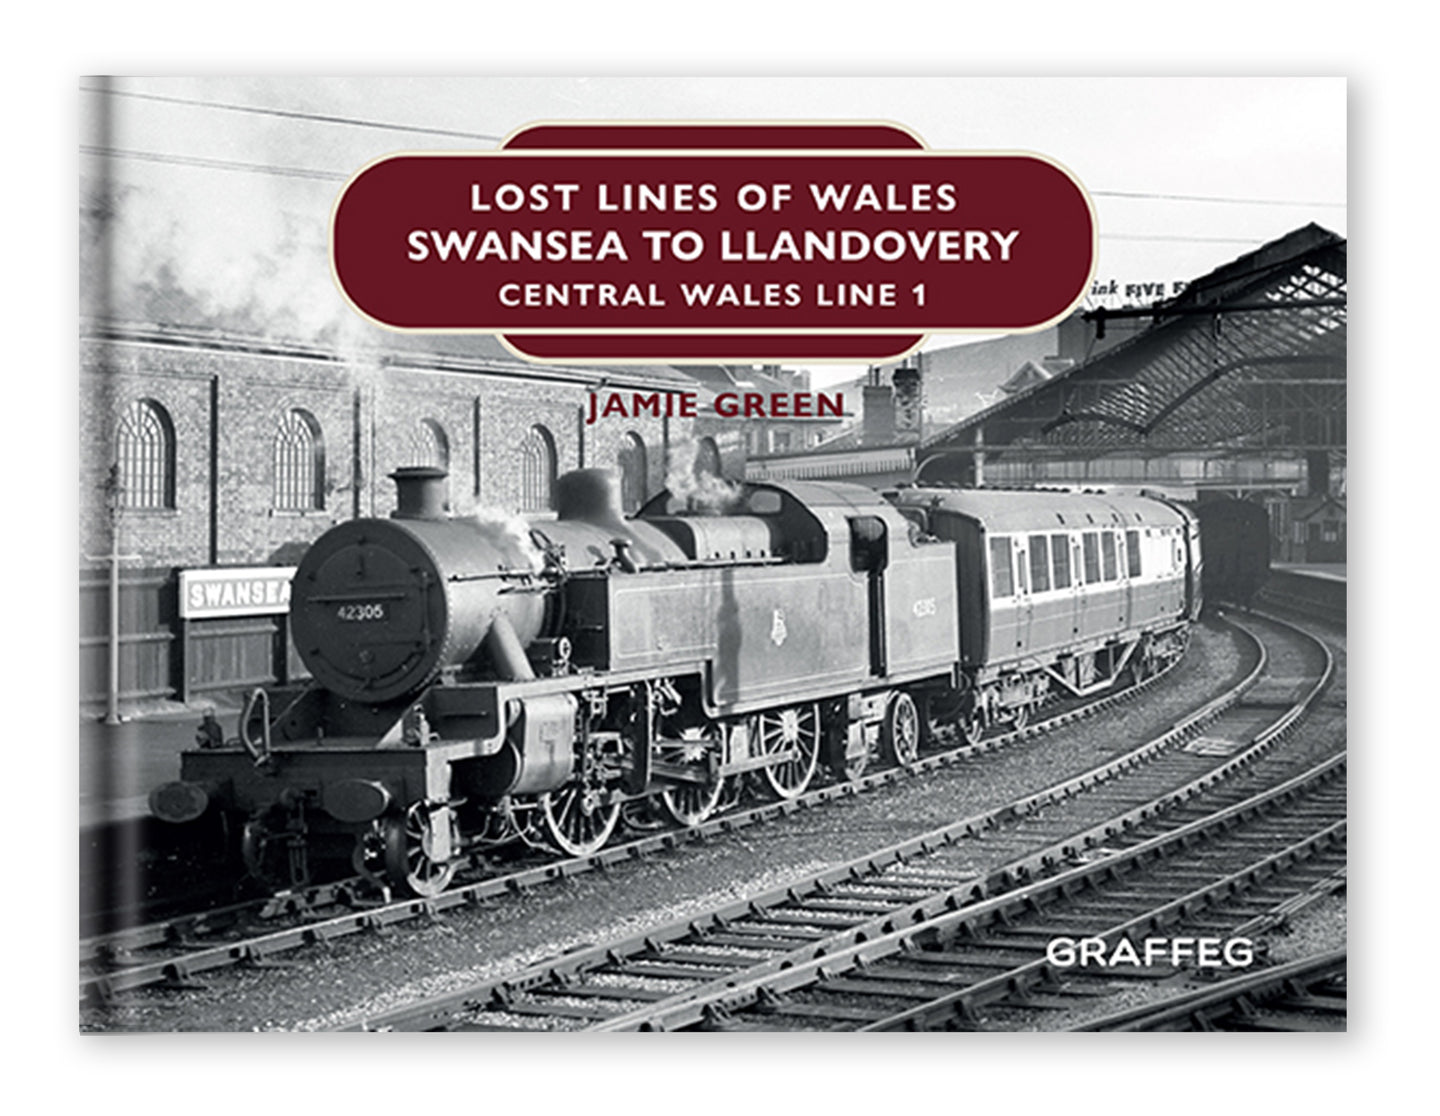 Lost Lines of Wales Swansea to Llandovery by Jamie Green published by Graffeg